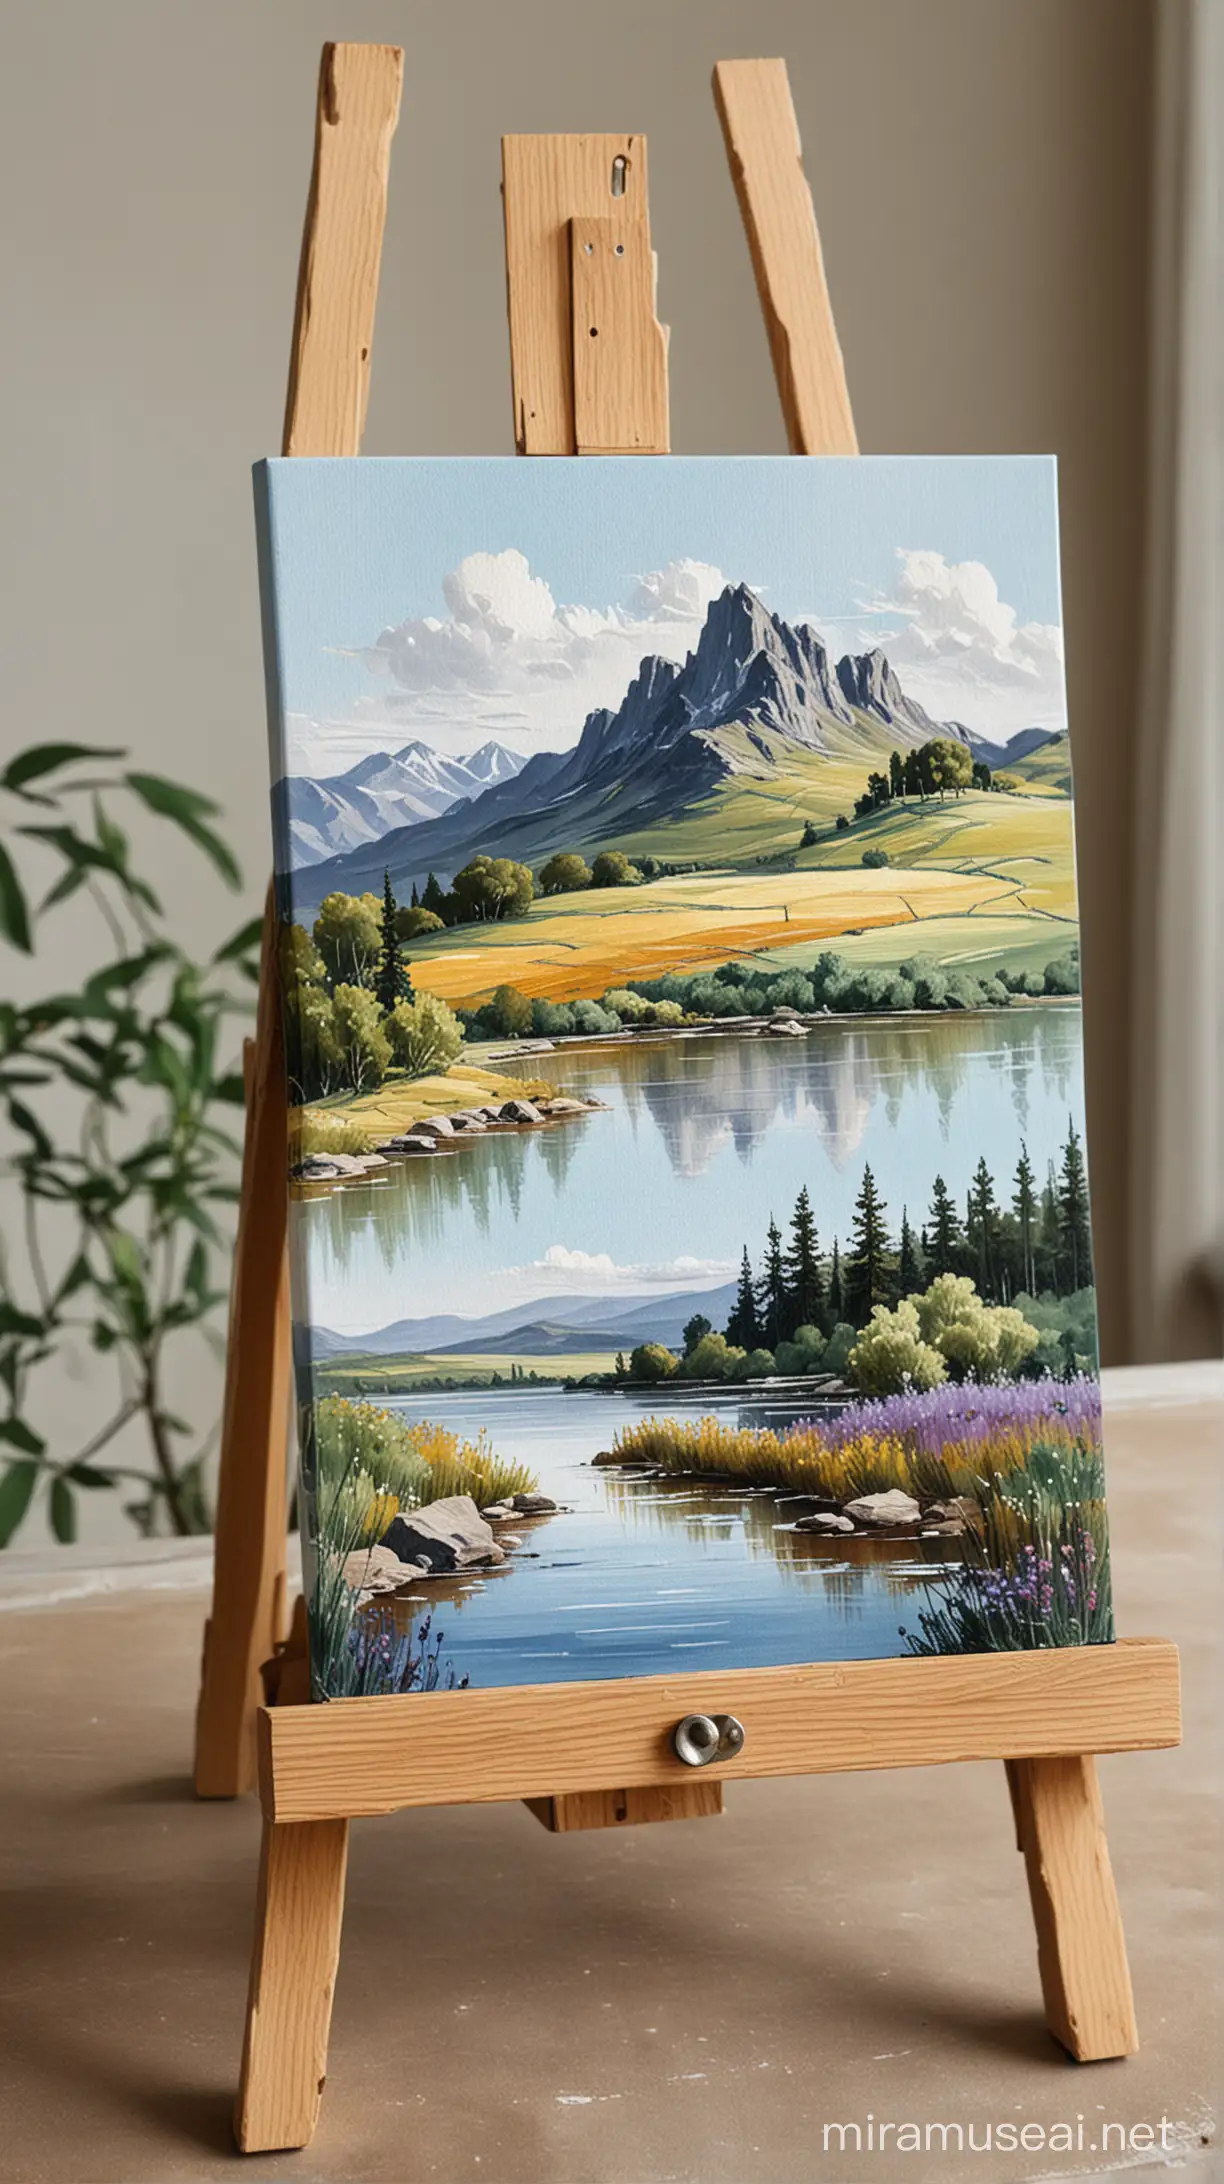 Tabletop Landscape Painting on Easel